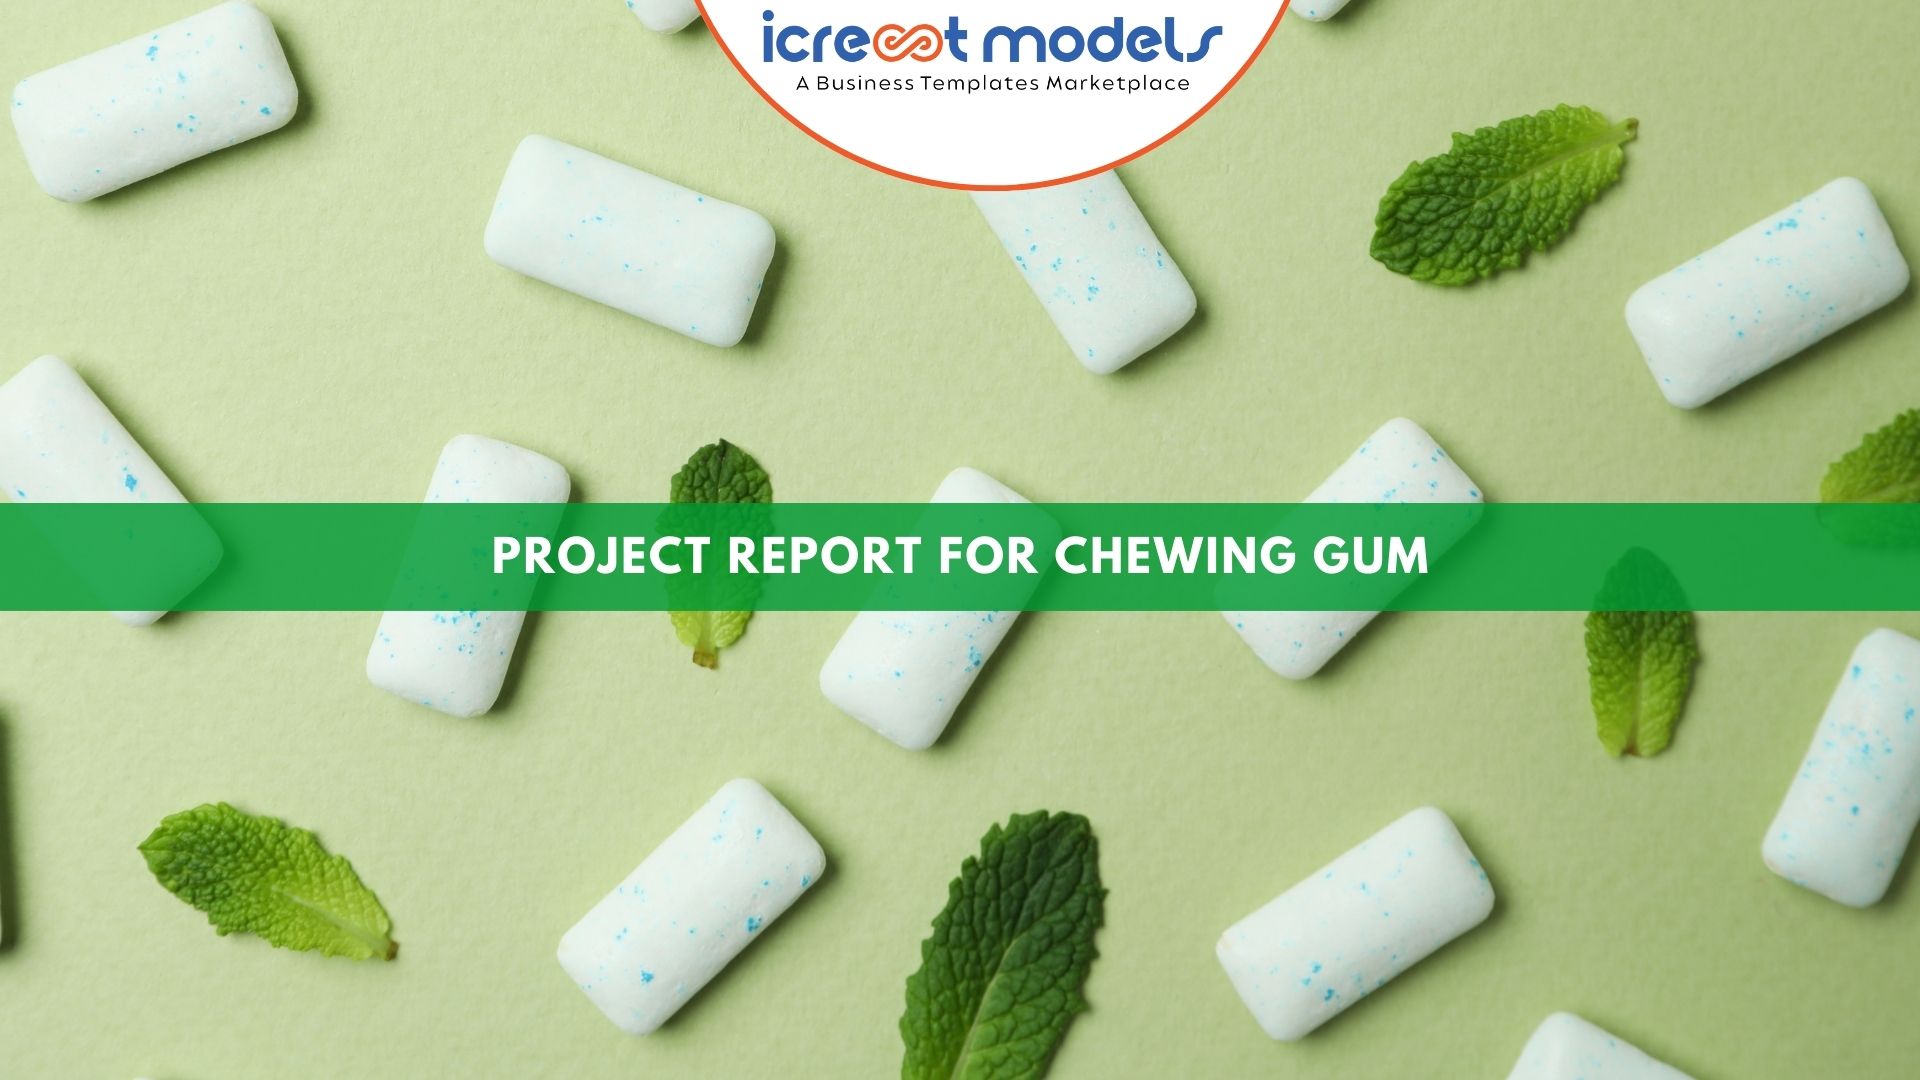 PROJECT REPORT FOR CHEWING GUM